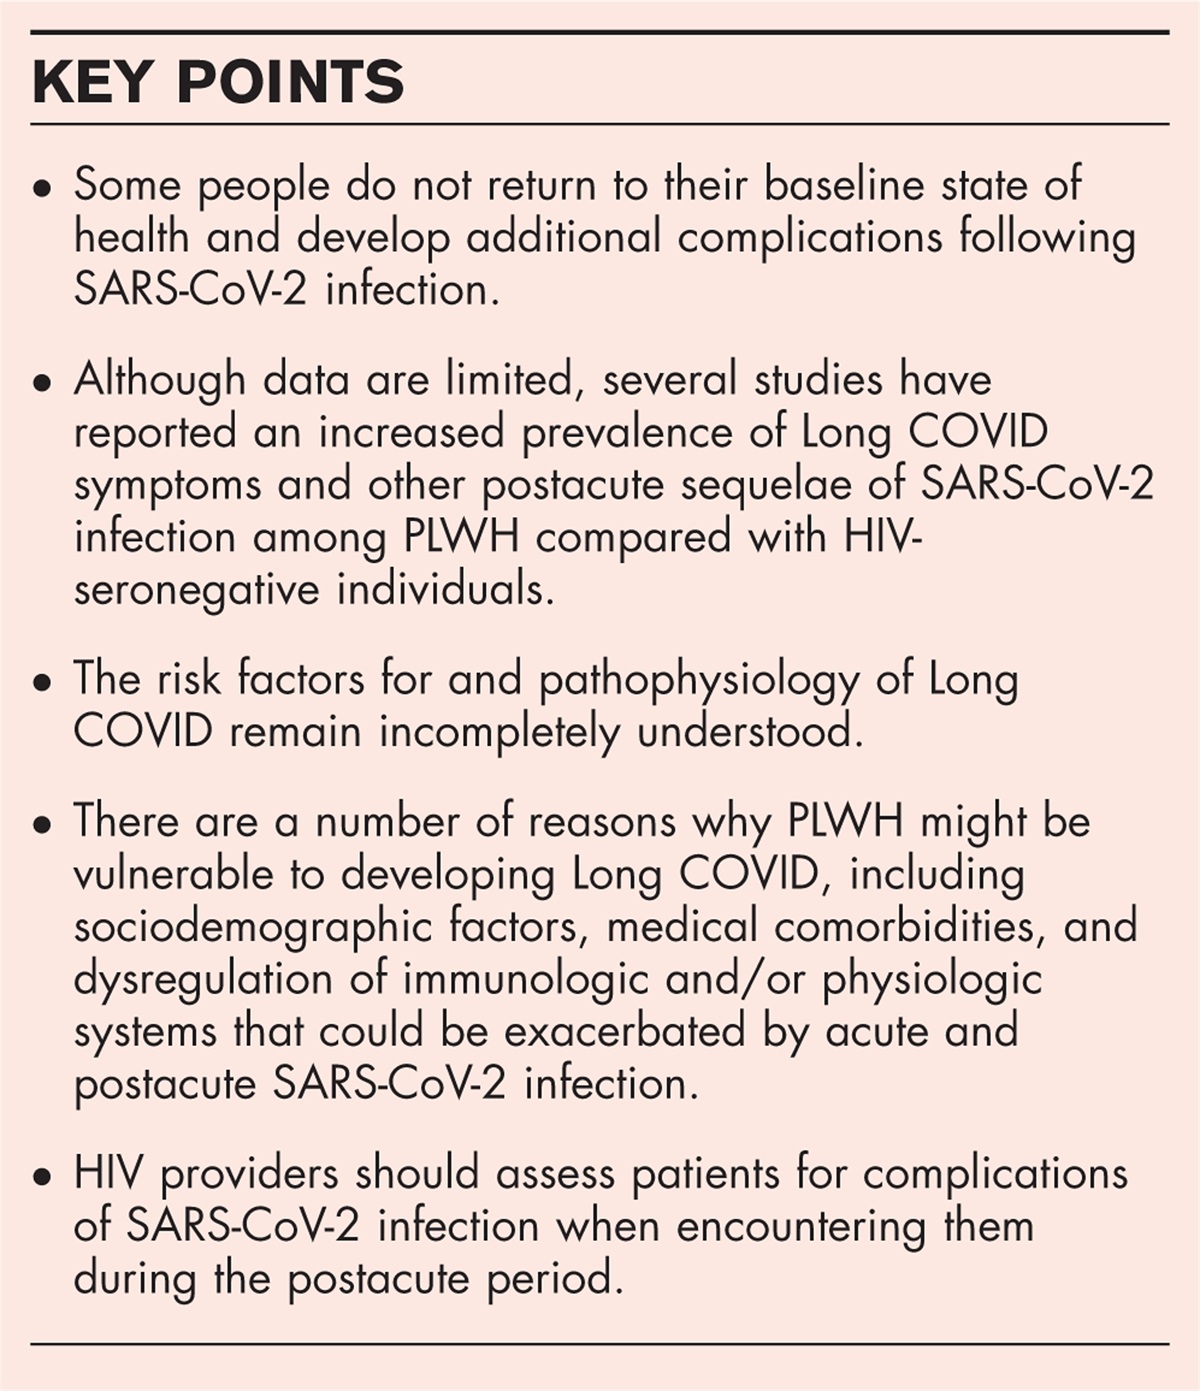 Long COVID in people living with HIV